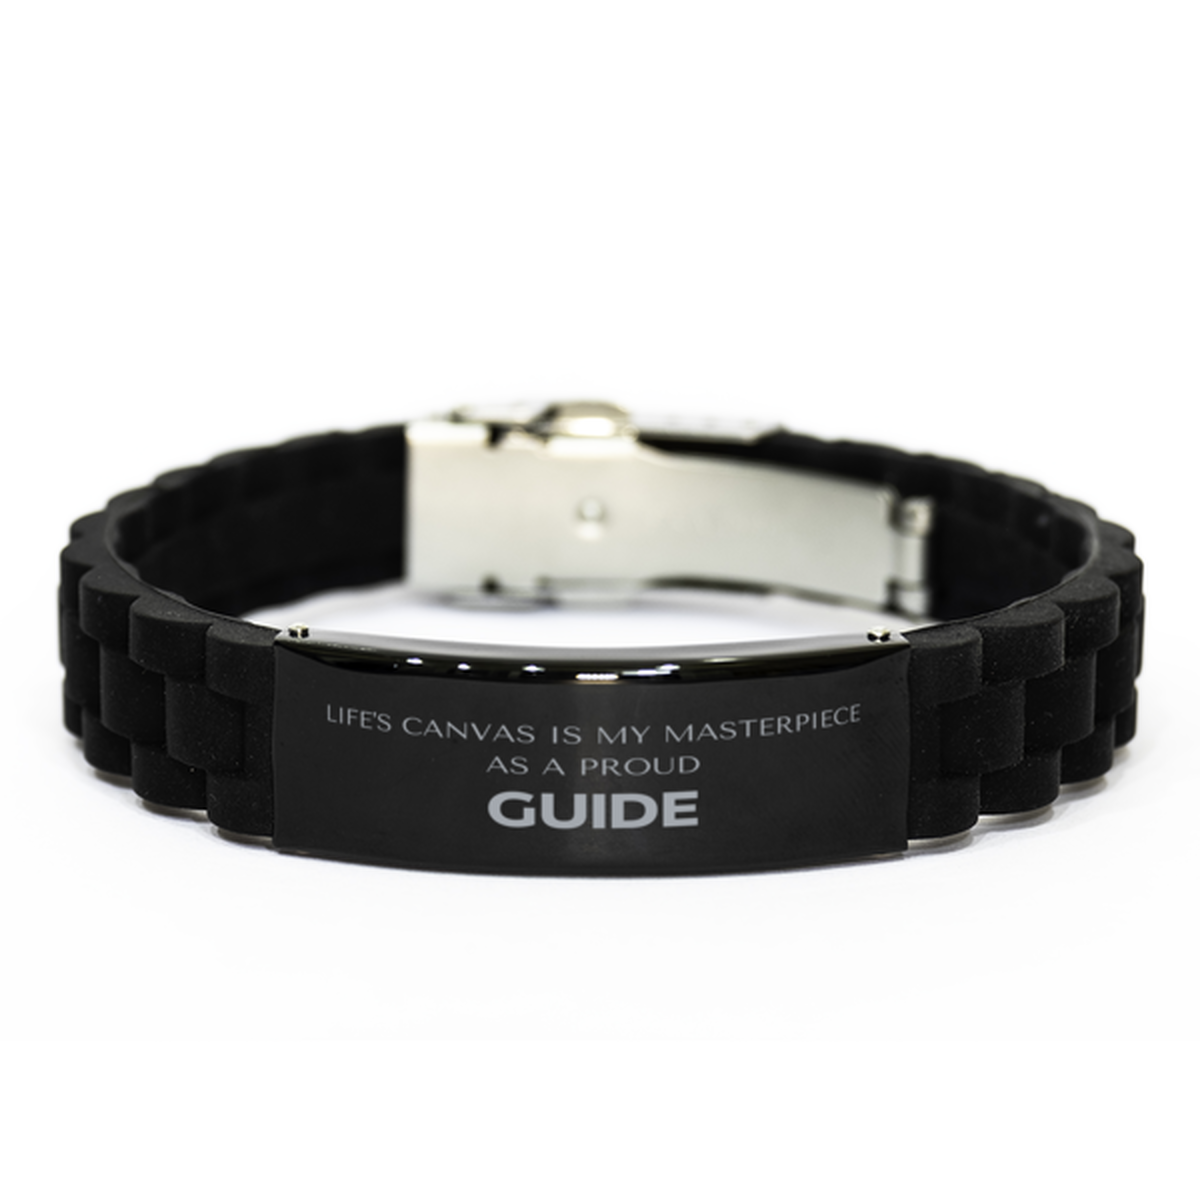 Proud Guide Gifts, Life's canvas is my masterpiece, Epic Birthday Christmas Unique Black Glidelock Clasp Bracelet For Guide, Coworkers, Men, Women, Friends